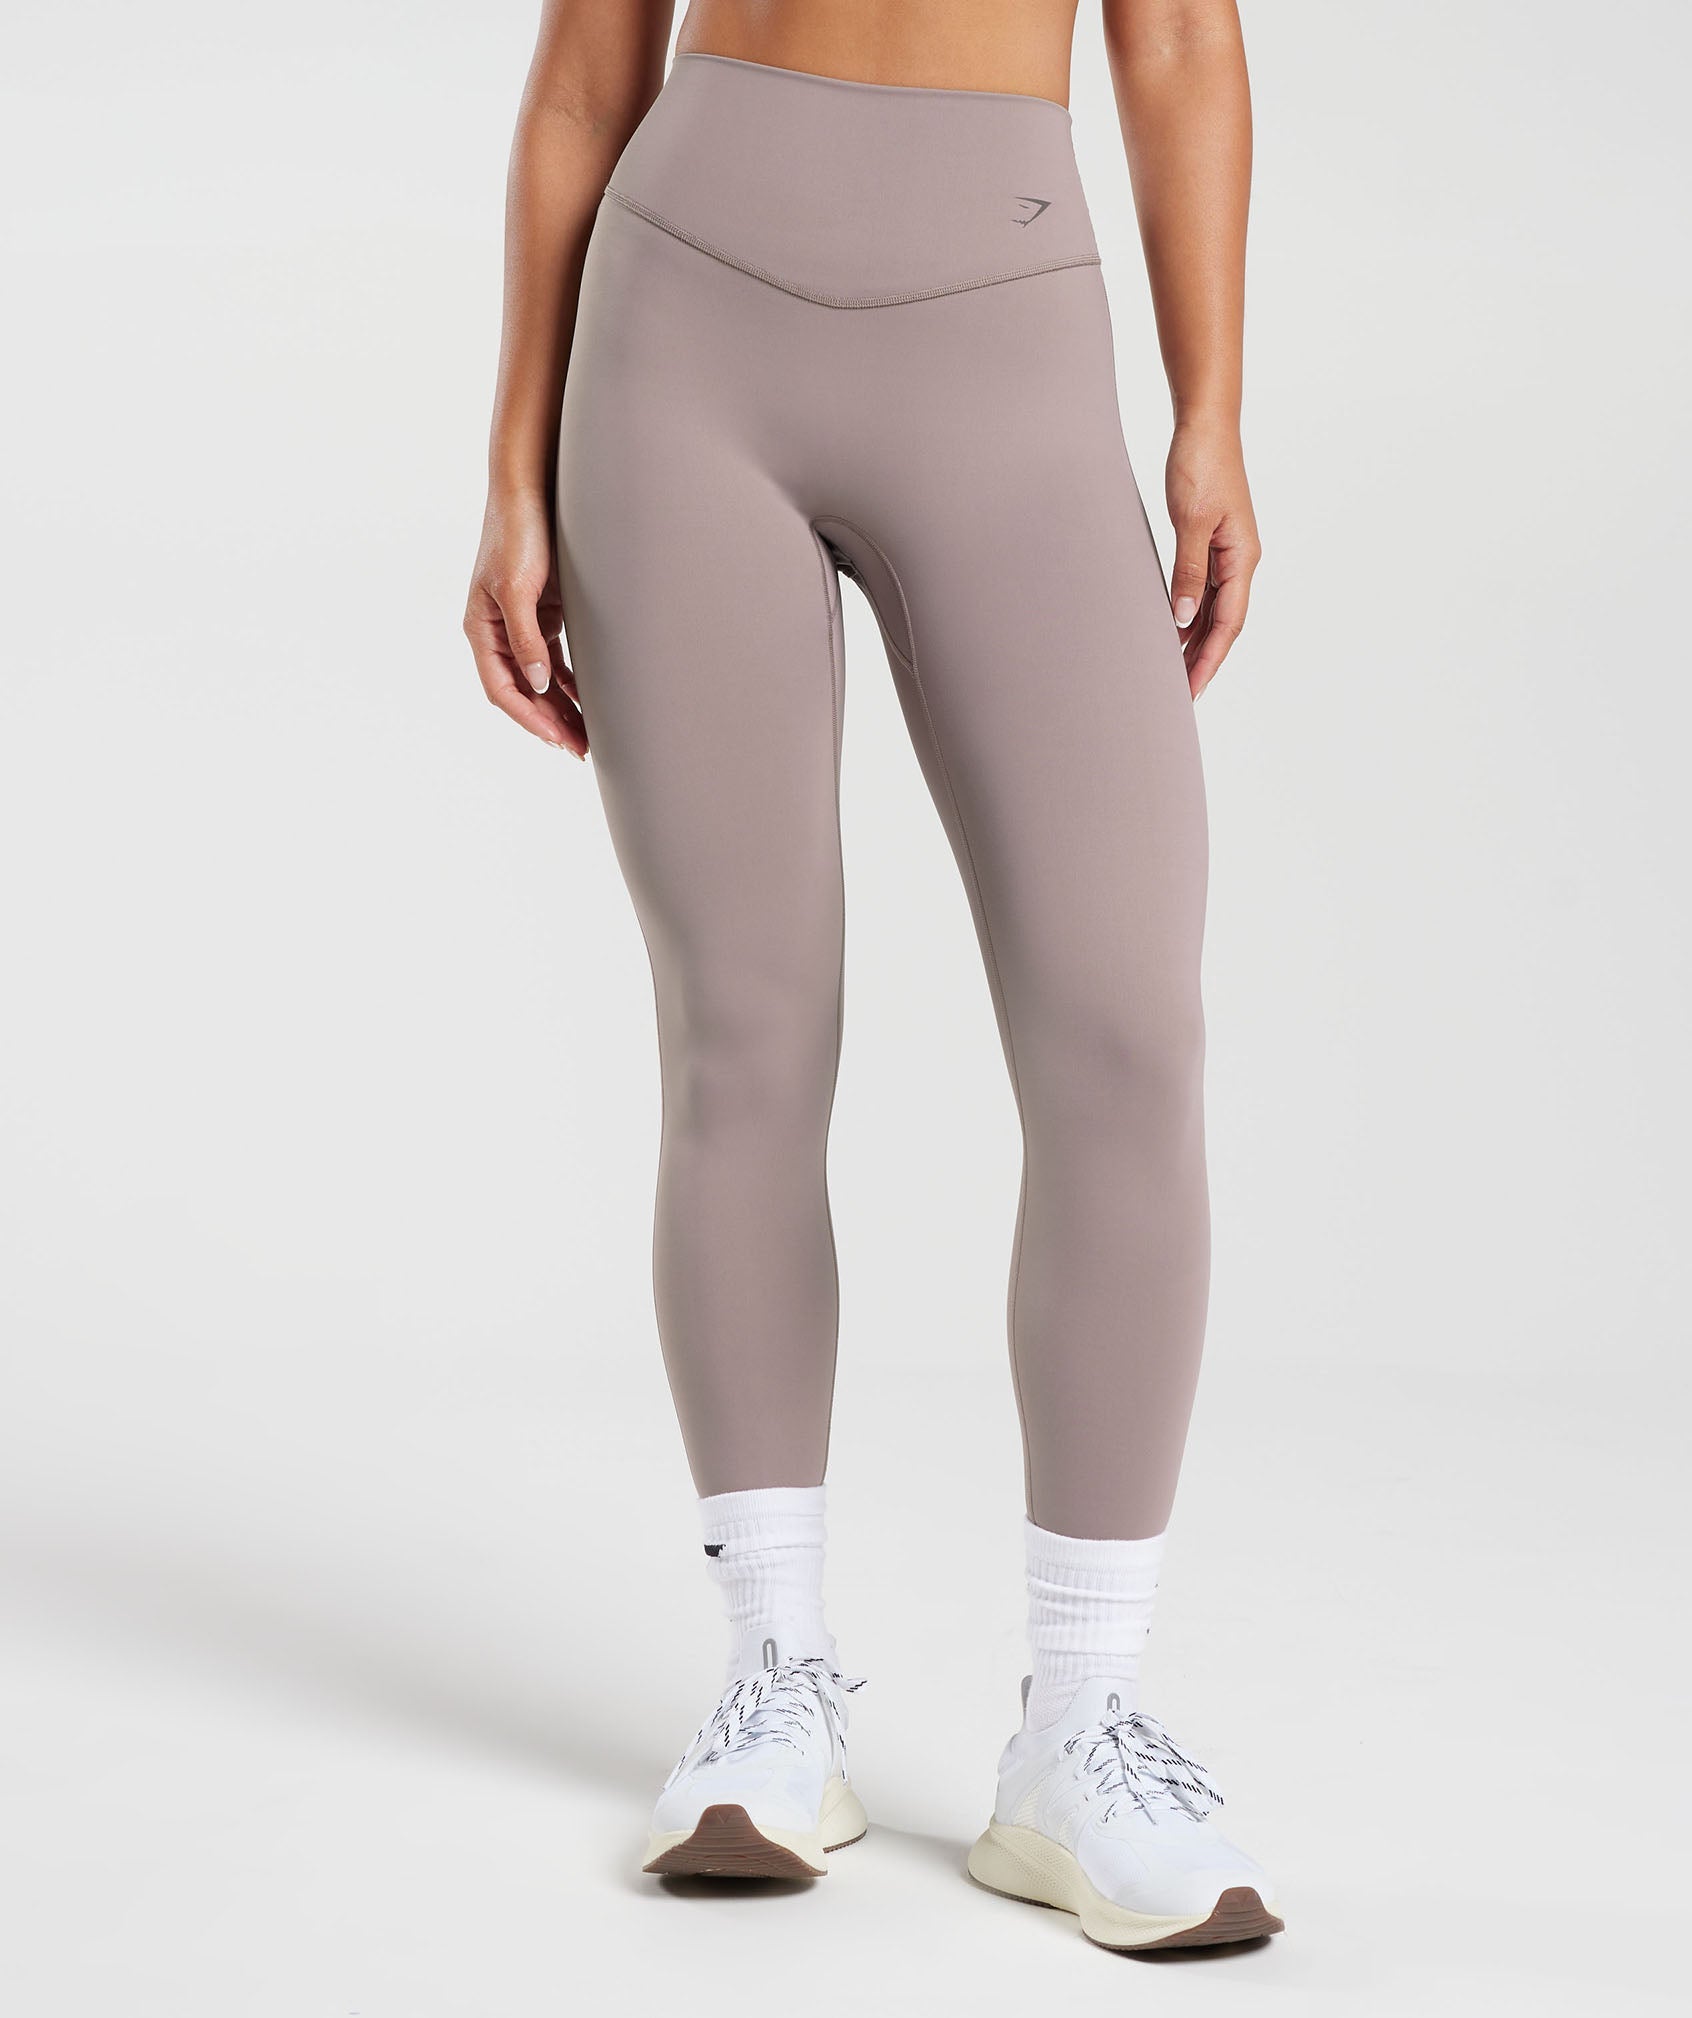 Elevate Leggings in Washed Mauve - view 1